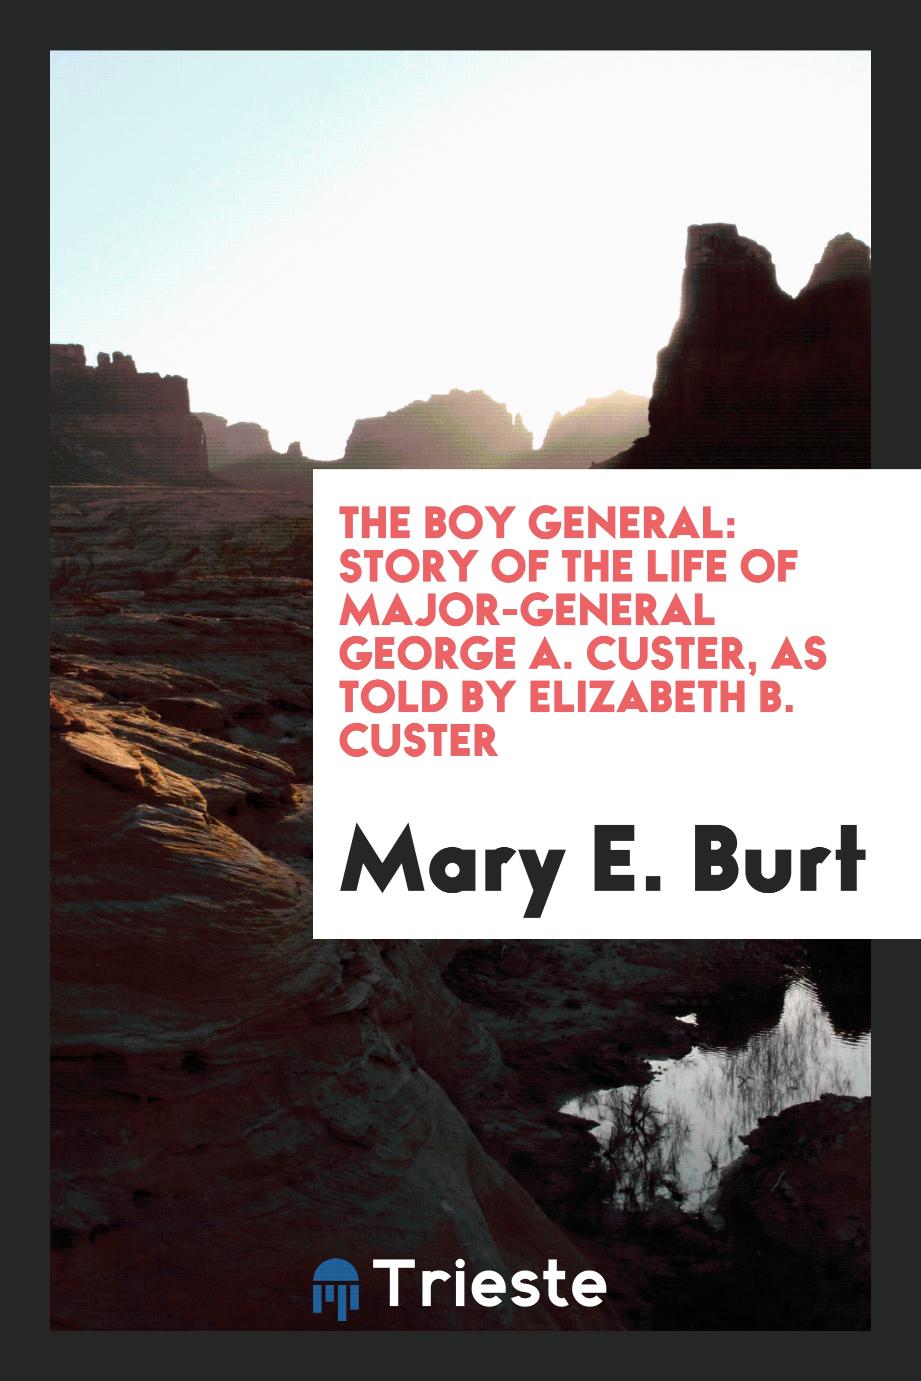 The boy general: story of the life of Major-General George A. Custer, as told by Elizabeth B. Custer